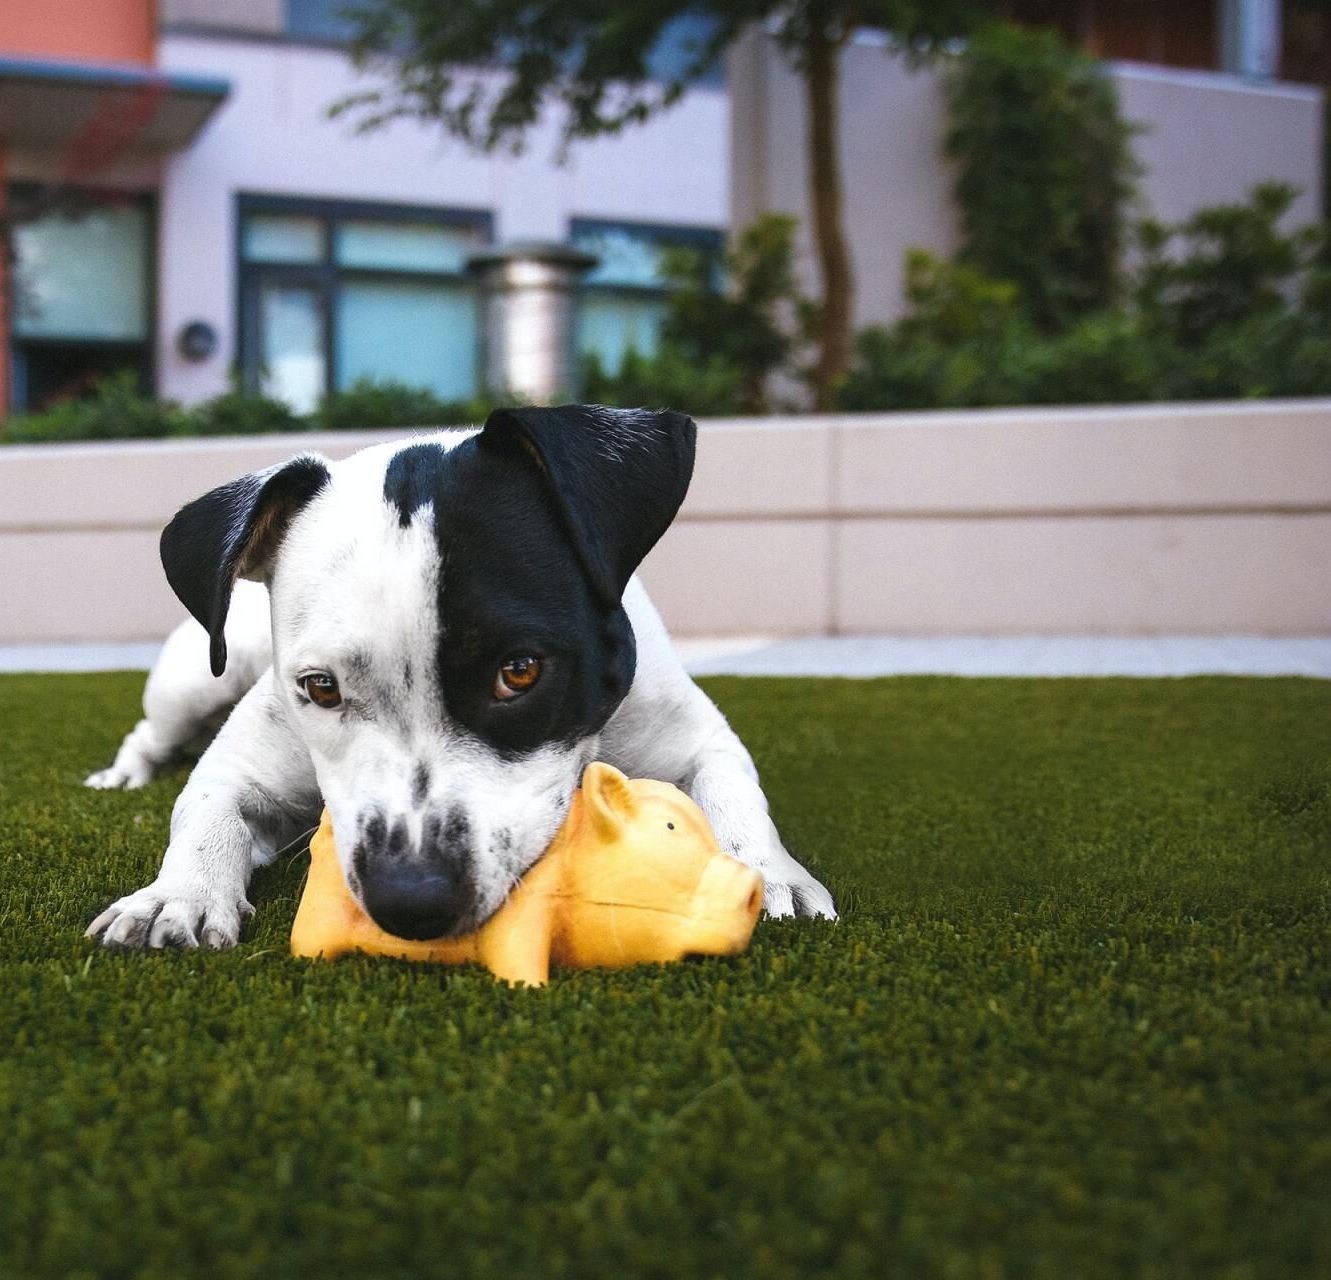 A black and white dog lies on artificial turf, playfully chewing on a yellow squeaky toy shaped like a pig. The background shows modern buildings and greenery, suggesting an urban park or backyard setting installed by a pet turf installer in Jacksonville FL.